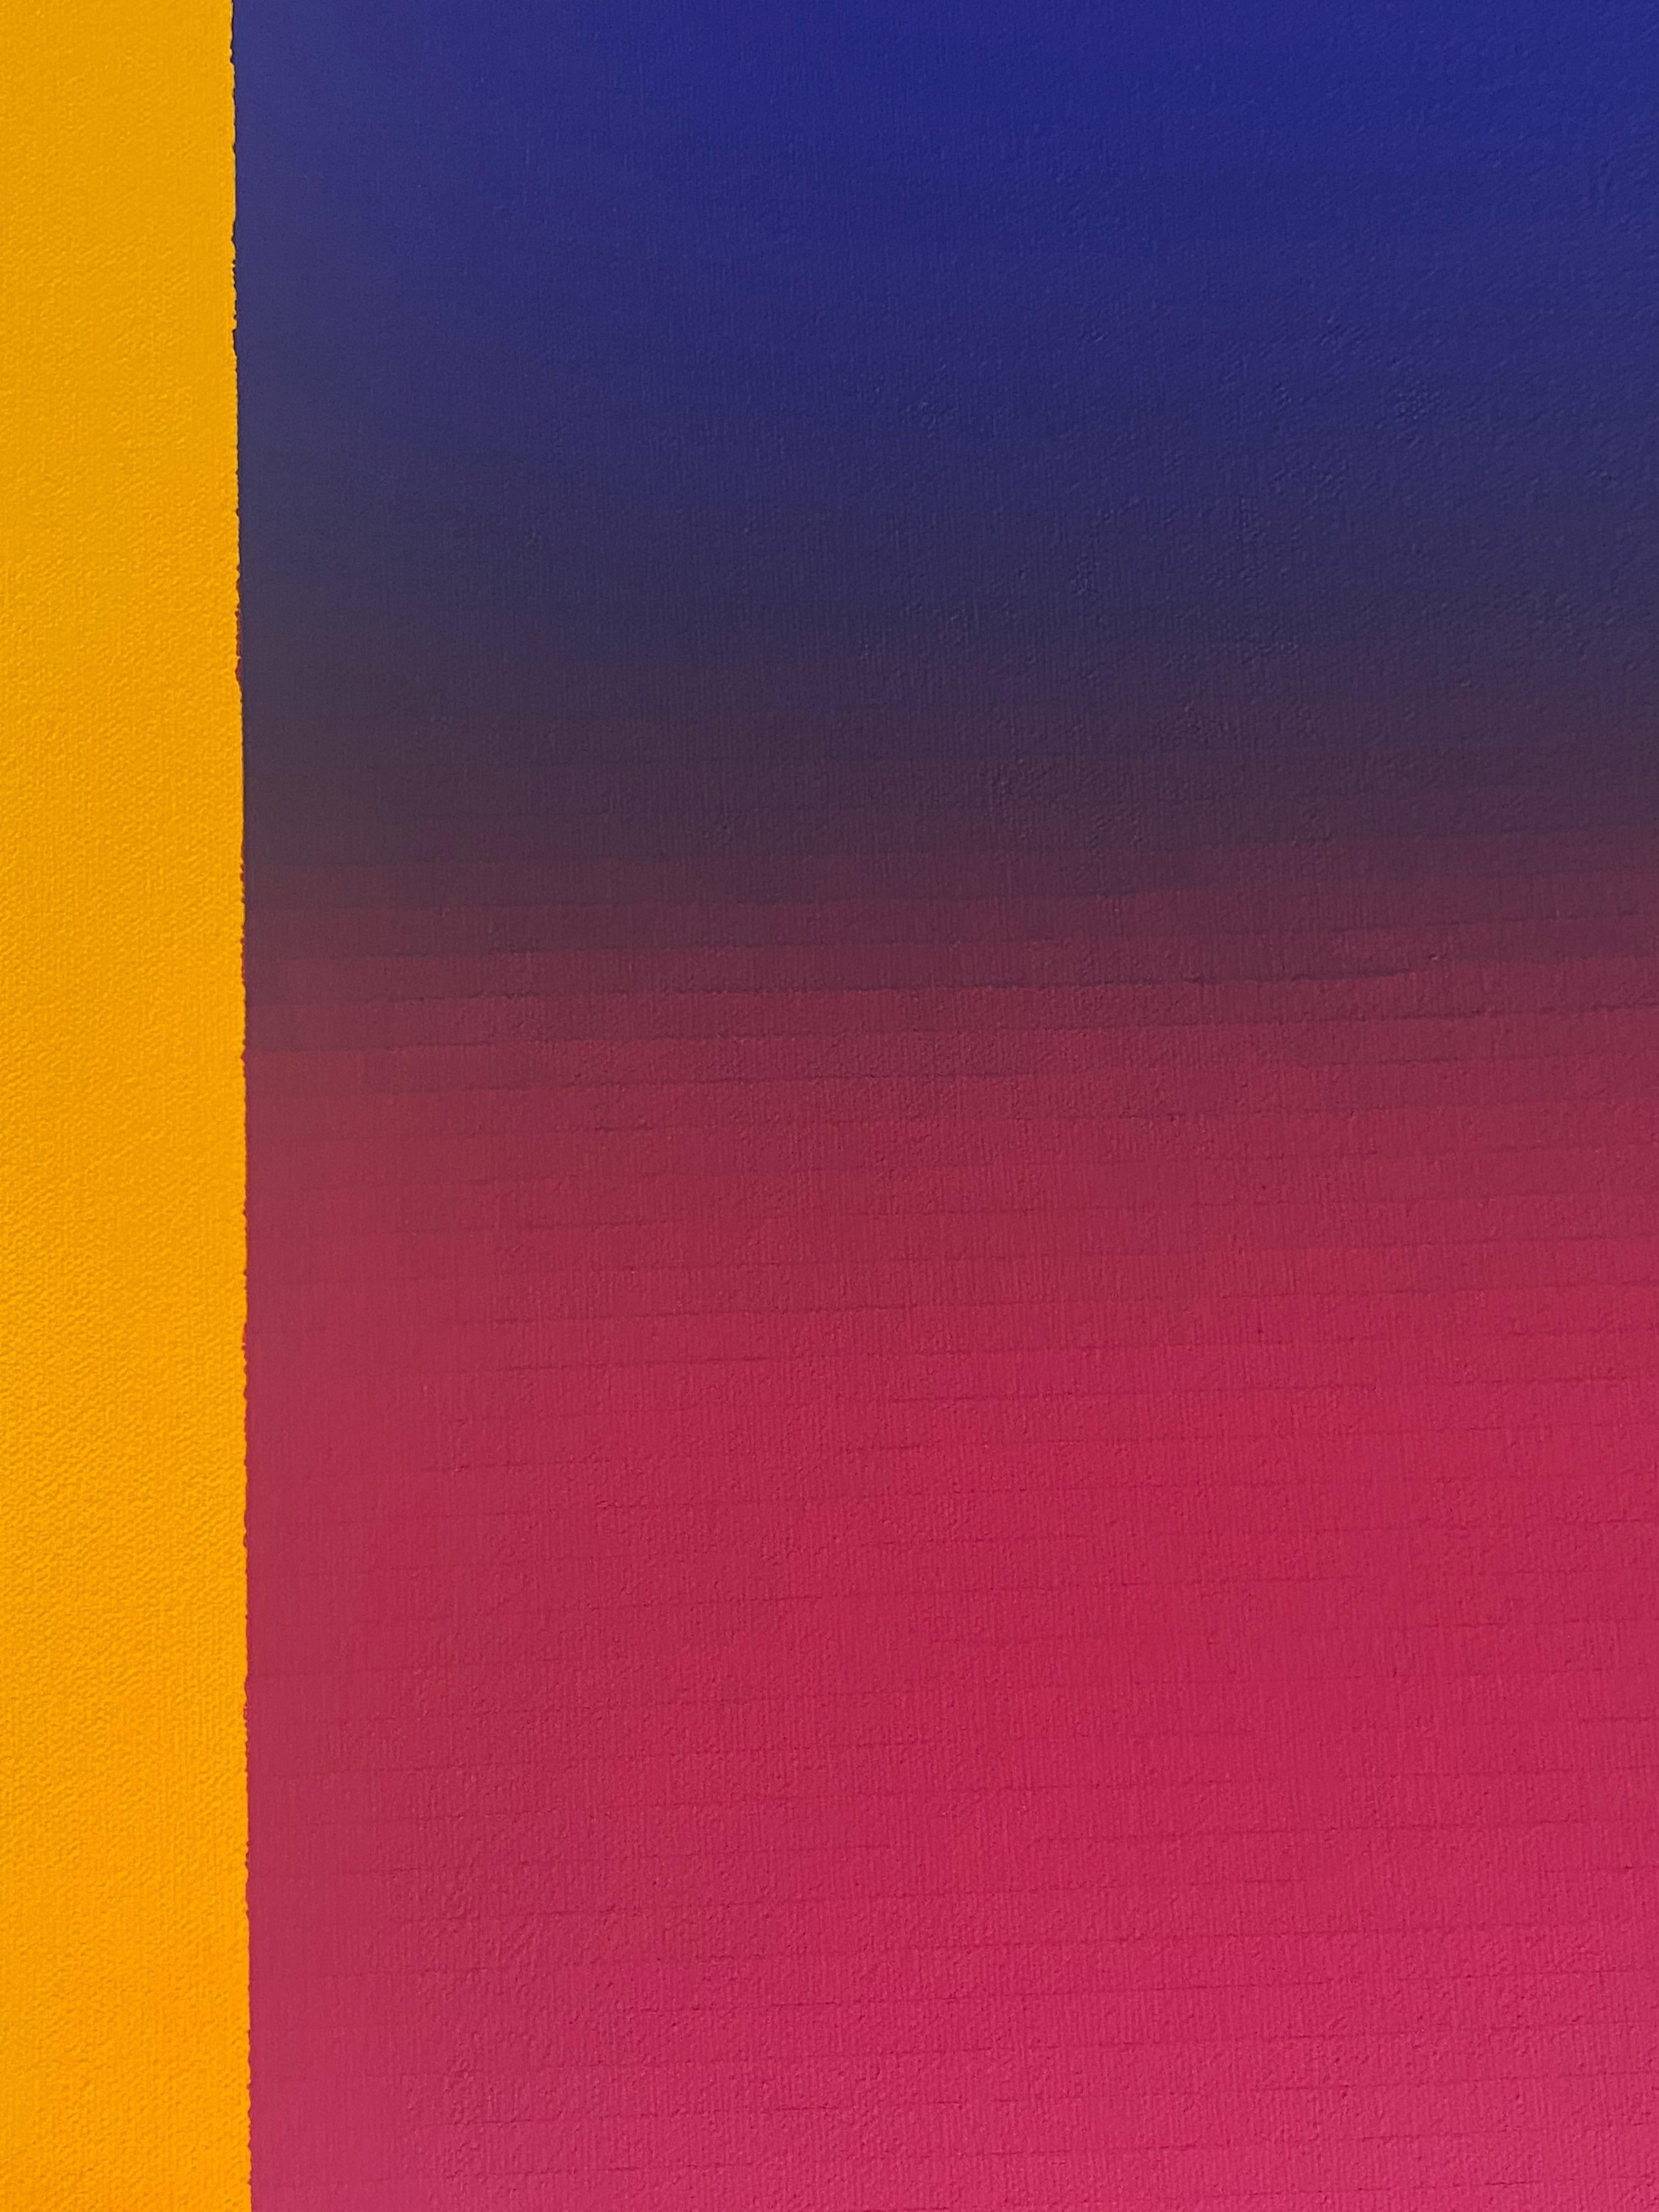 Thin stripes of color in gradient shades start with deep, dark indigo at the top and bottom and transition through navy blue to a brilliant shade of hot pink with golden yellow at the edges. Signed and titled on verso.

Audrey Stone has spent her